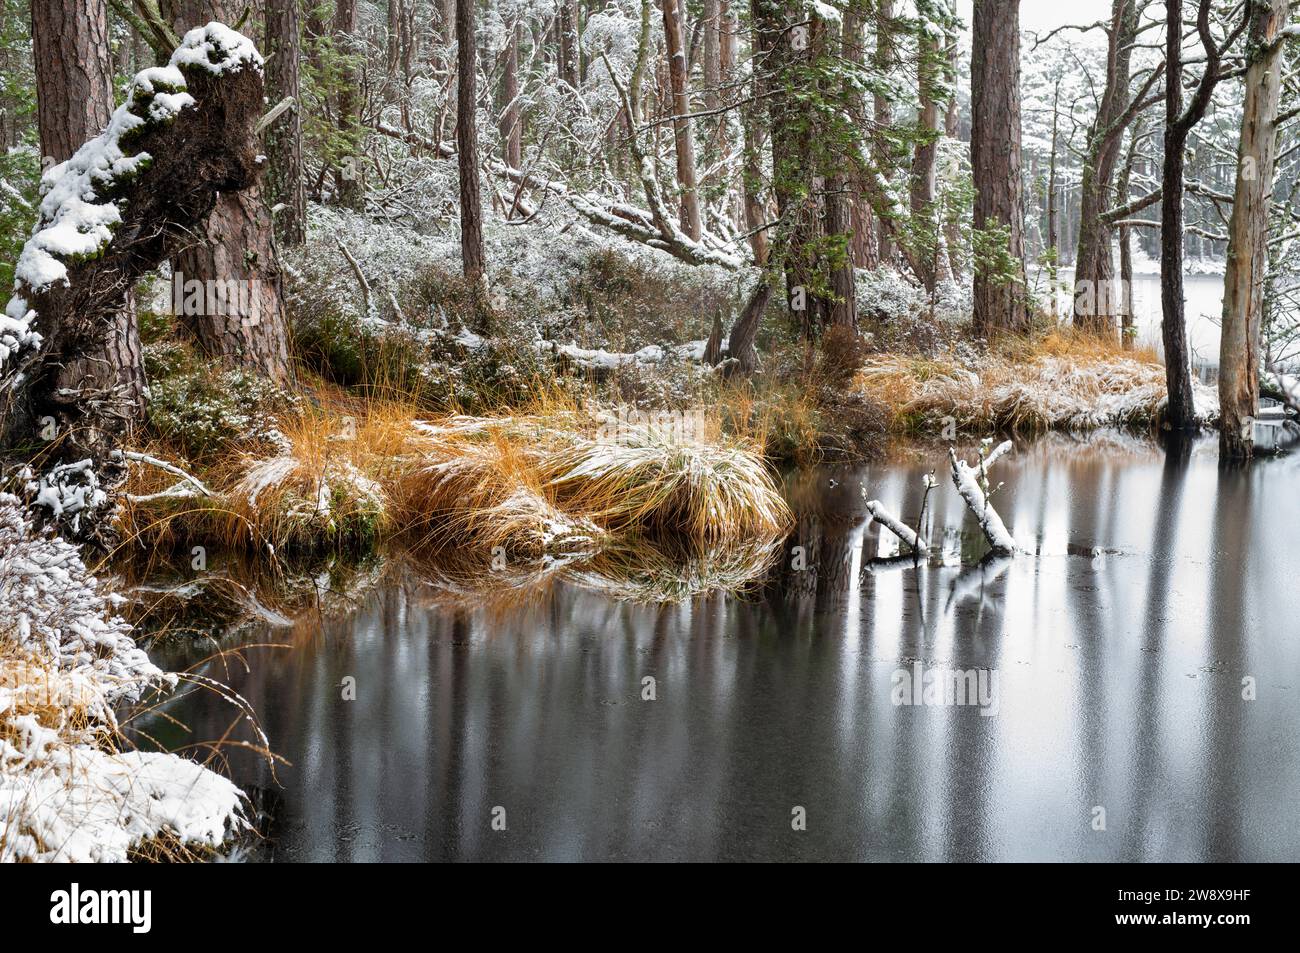 Pine trees and grass along the waters edge in the snow. Loch Mallachie, Highlands, Scotland Stock Photo